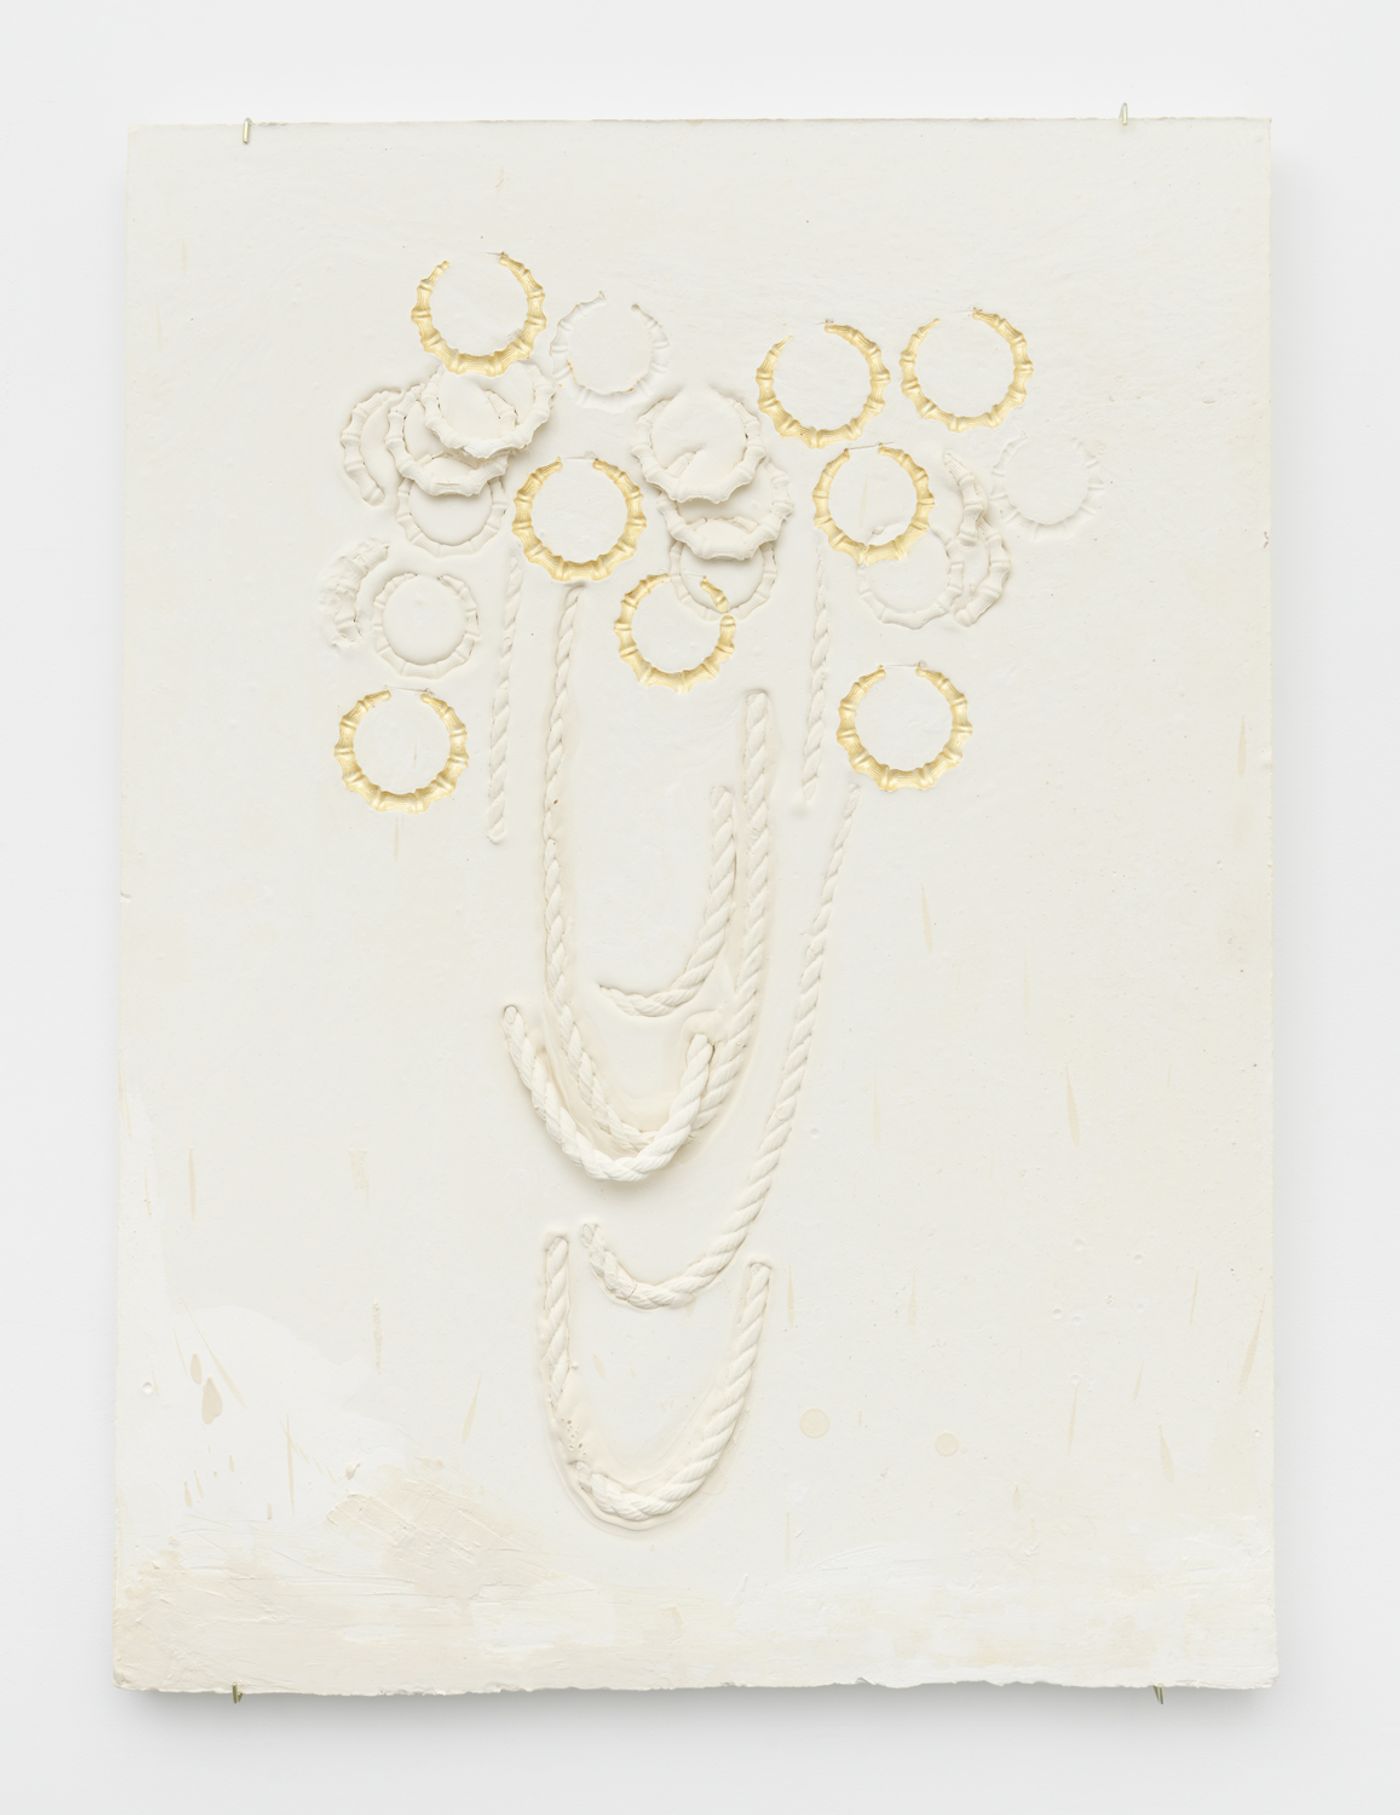 Image of Composition with Rope Chains Overlapping Round Bamboo Earrings, Impressed with Gold , 2019: Plaster, foam, and acrylic